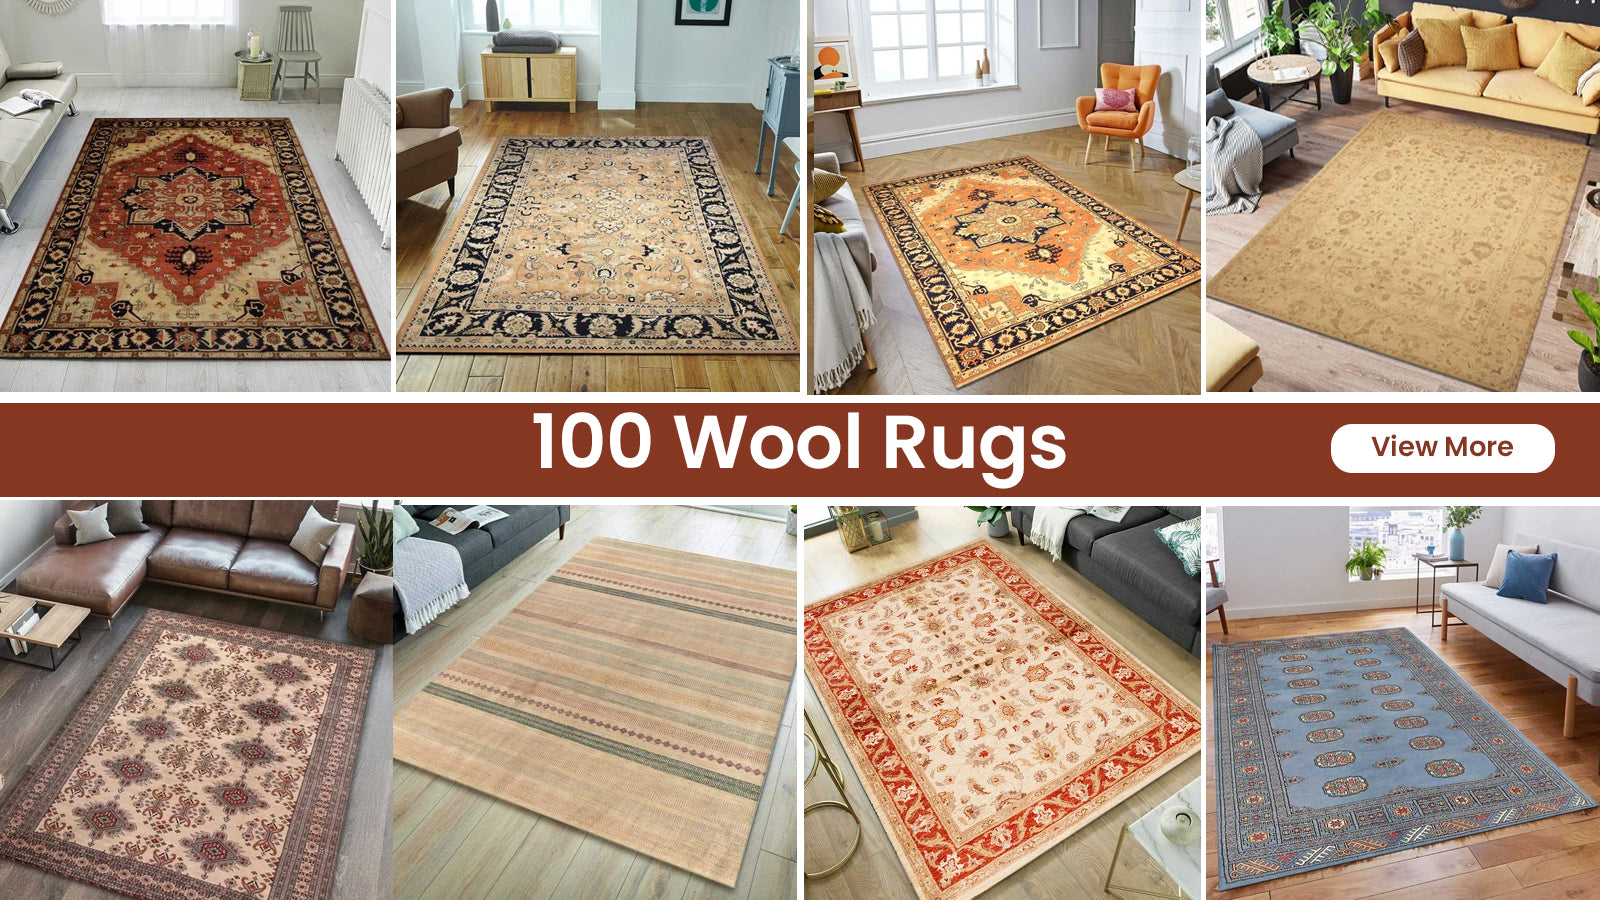 Wool Carpet and Rugs - STARK